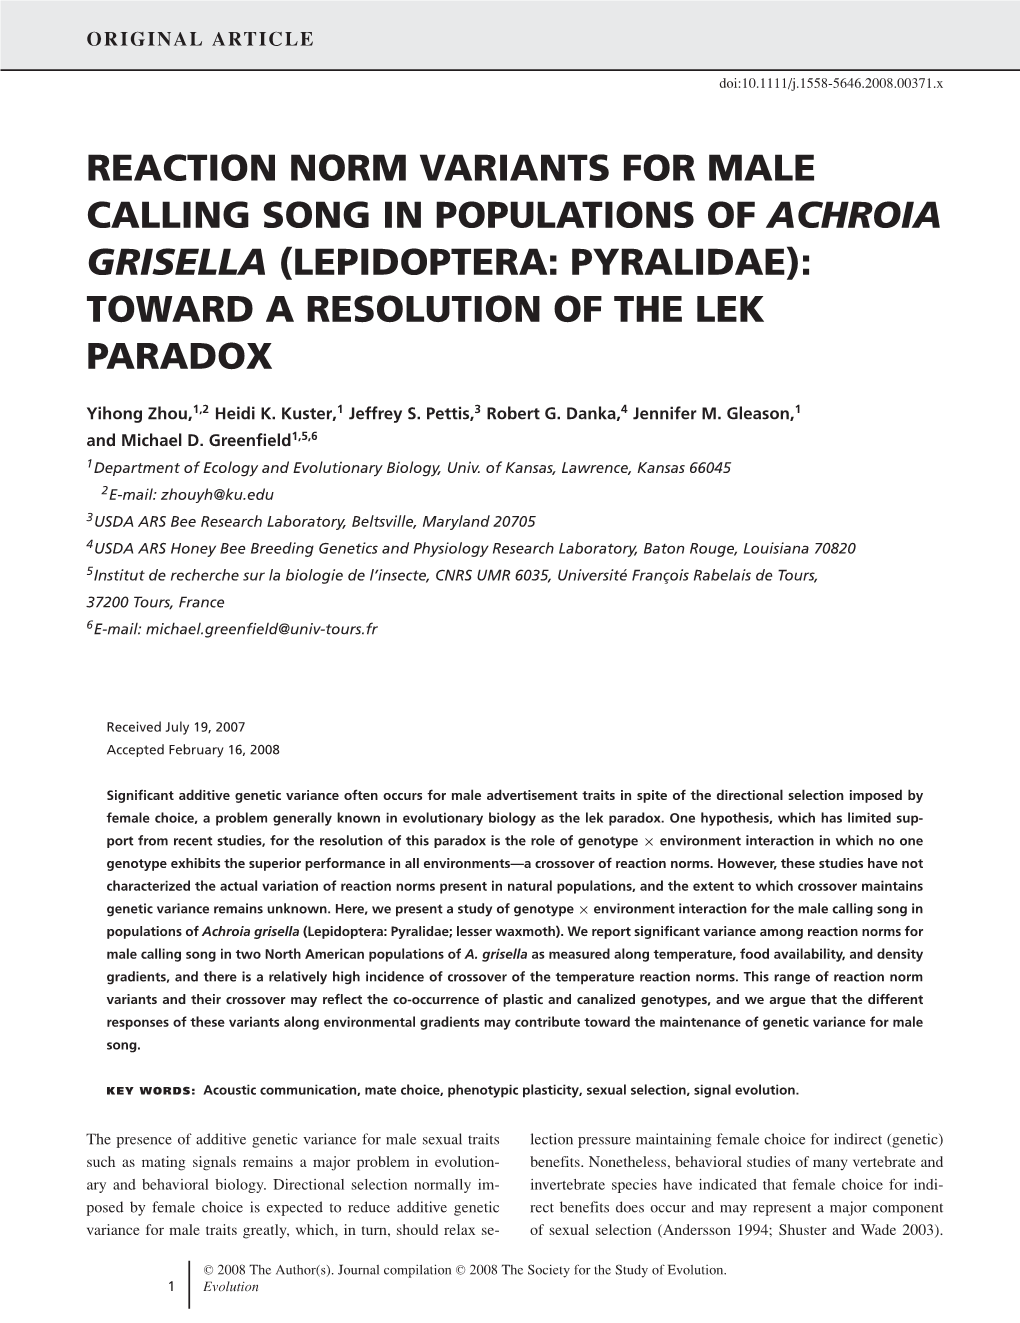 Reaction Norm Variants for Male Calling Song in Populations of Achroia Grisella (Lepidoptera: Pyralidae): Toward a Resolution of the Lek Paradox